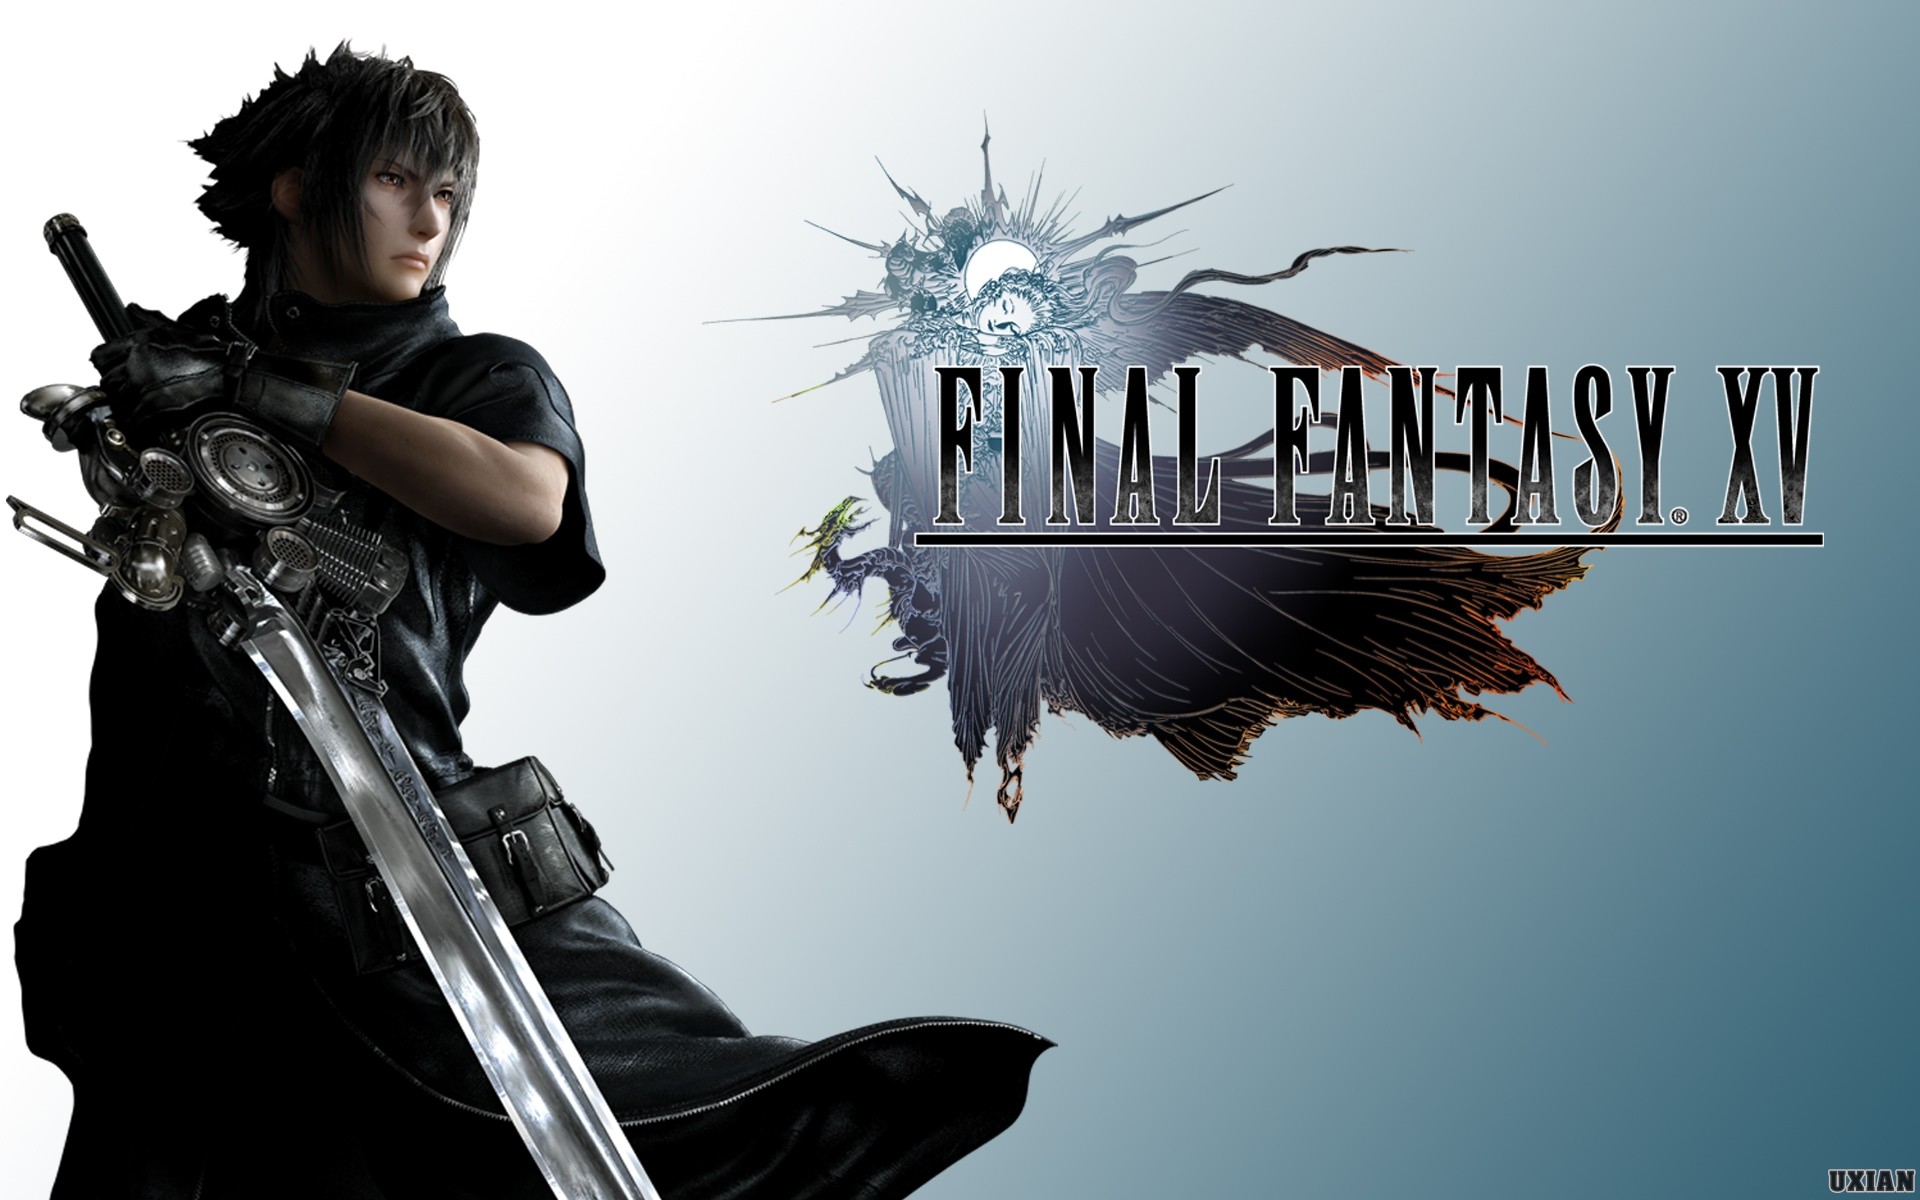 1920x1200 file_download logo and hero of the game Final Fantasy xv